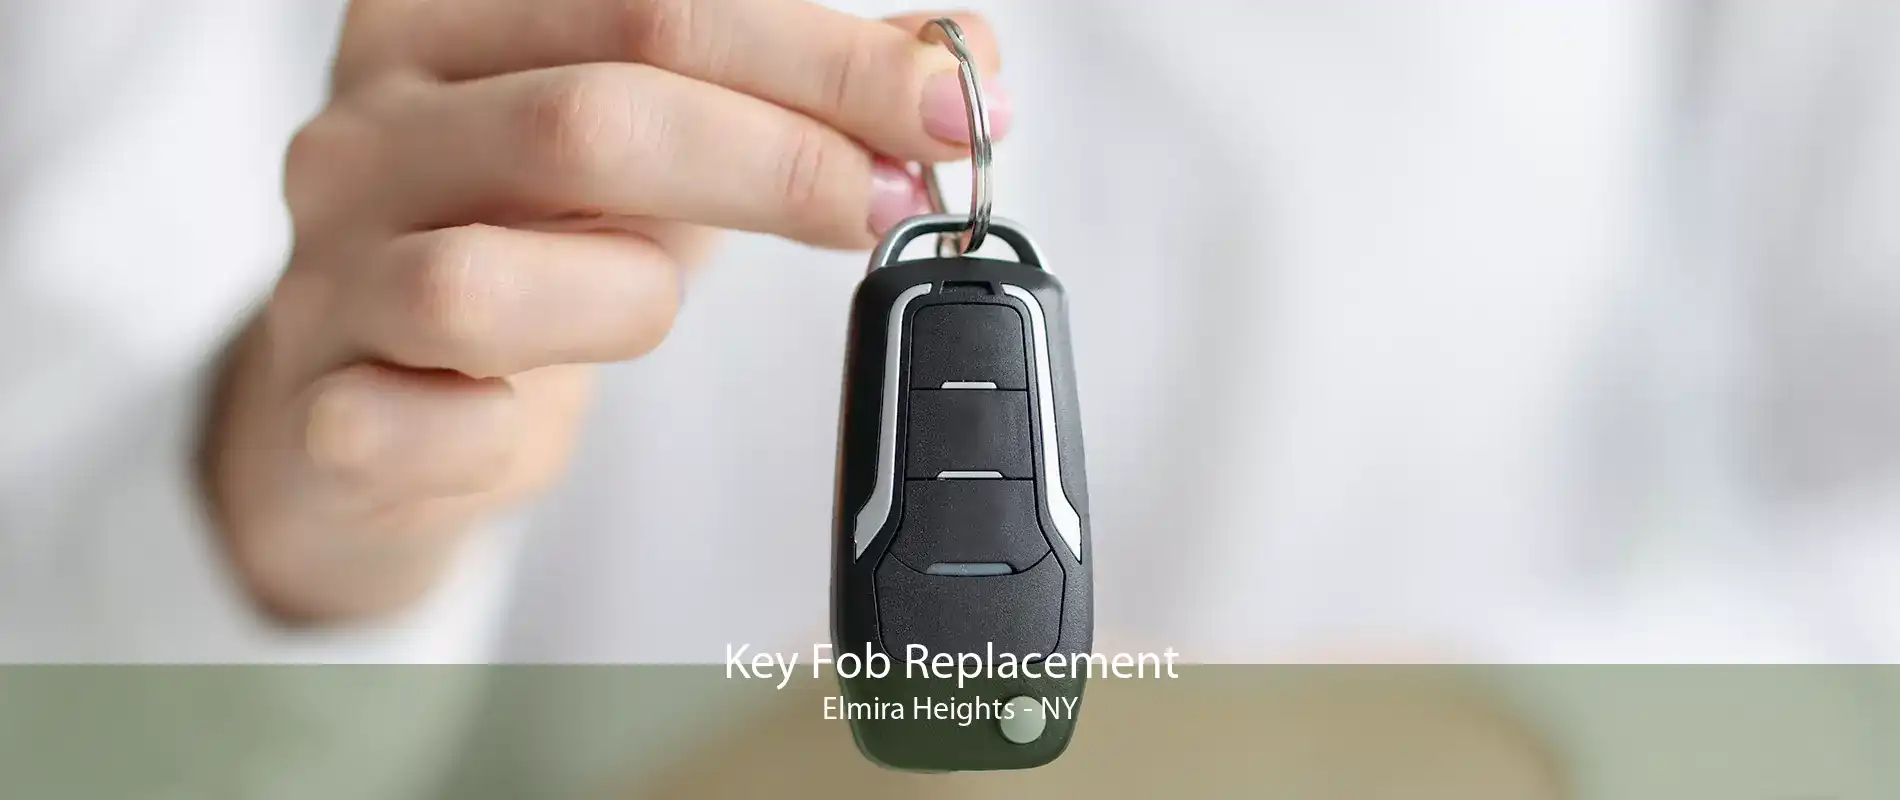 Key Fob Replacement Elmira Heights - NY